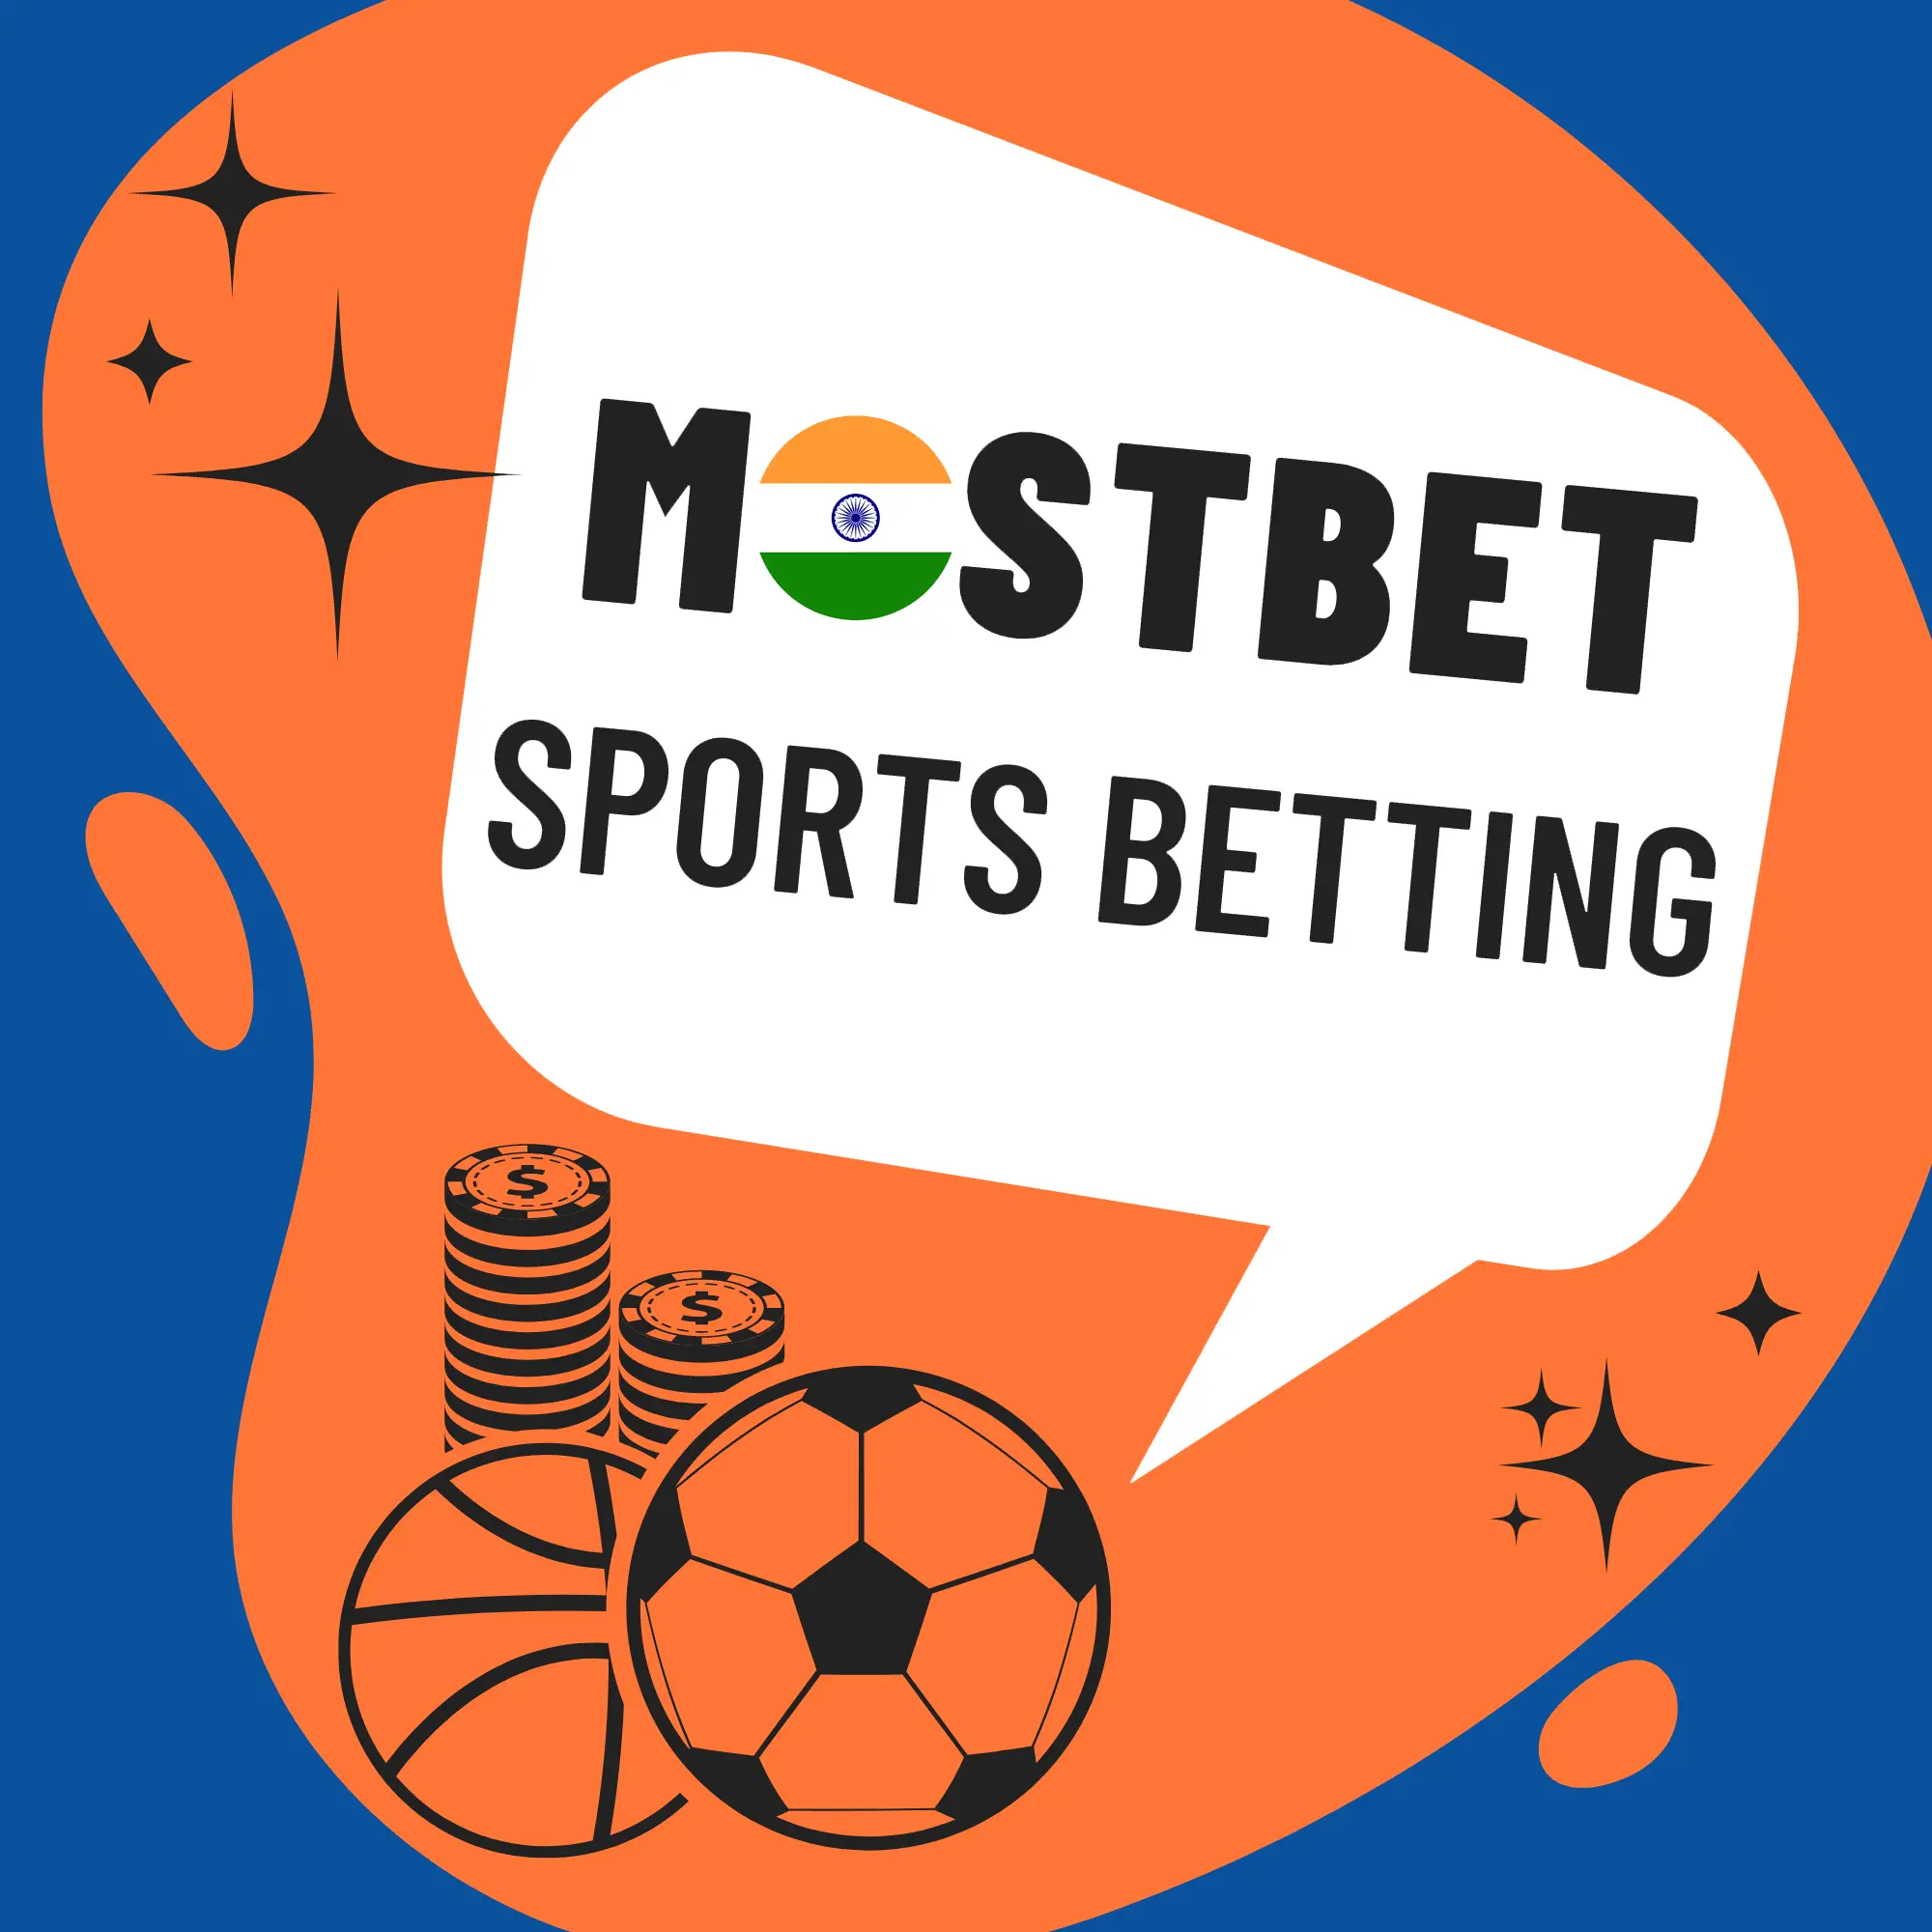 Mostbet Sports Betting in India.